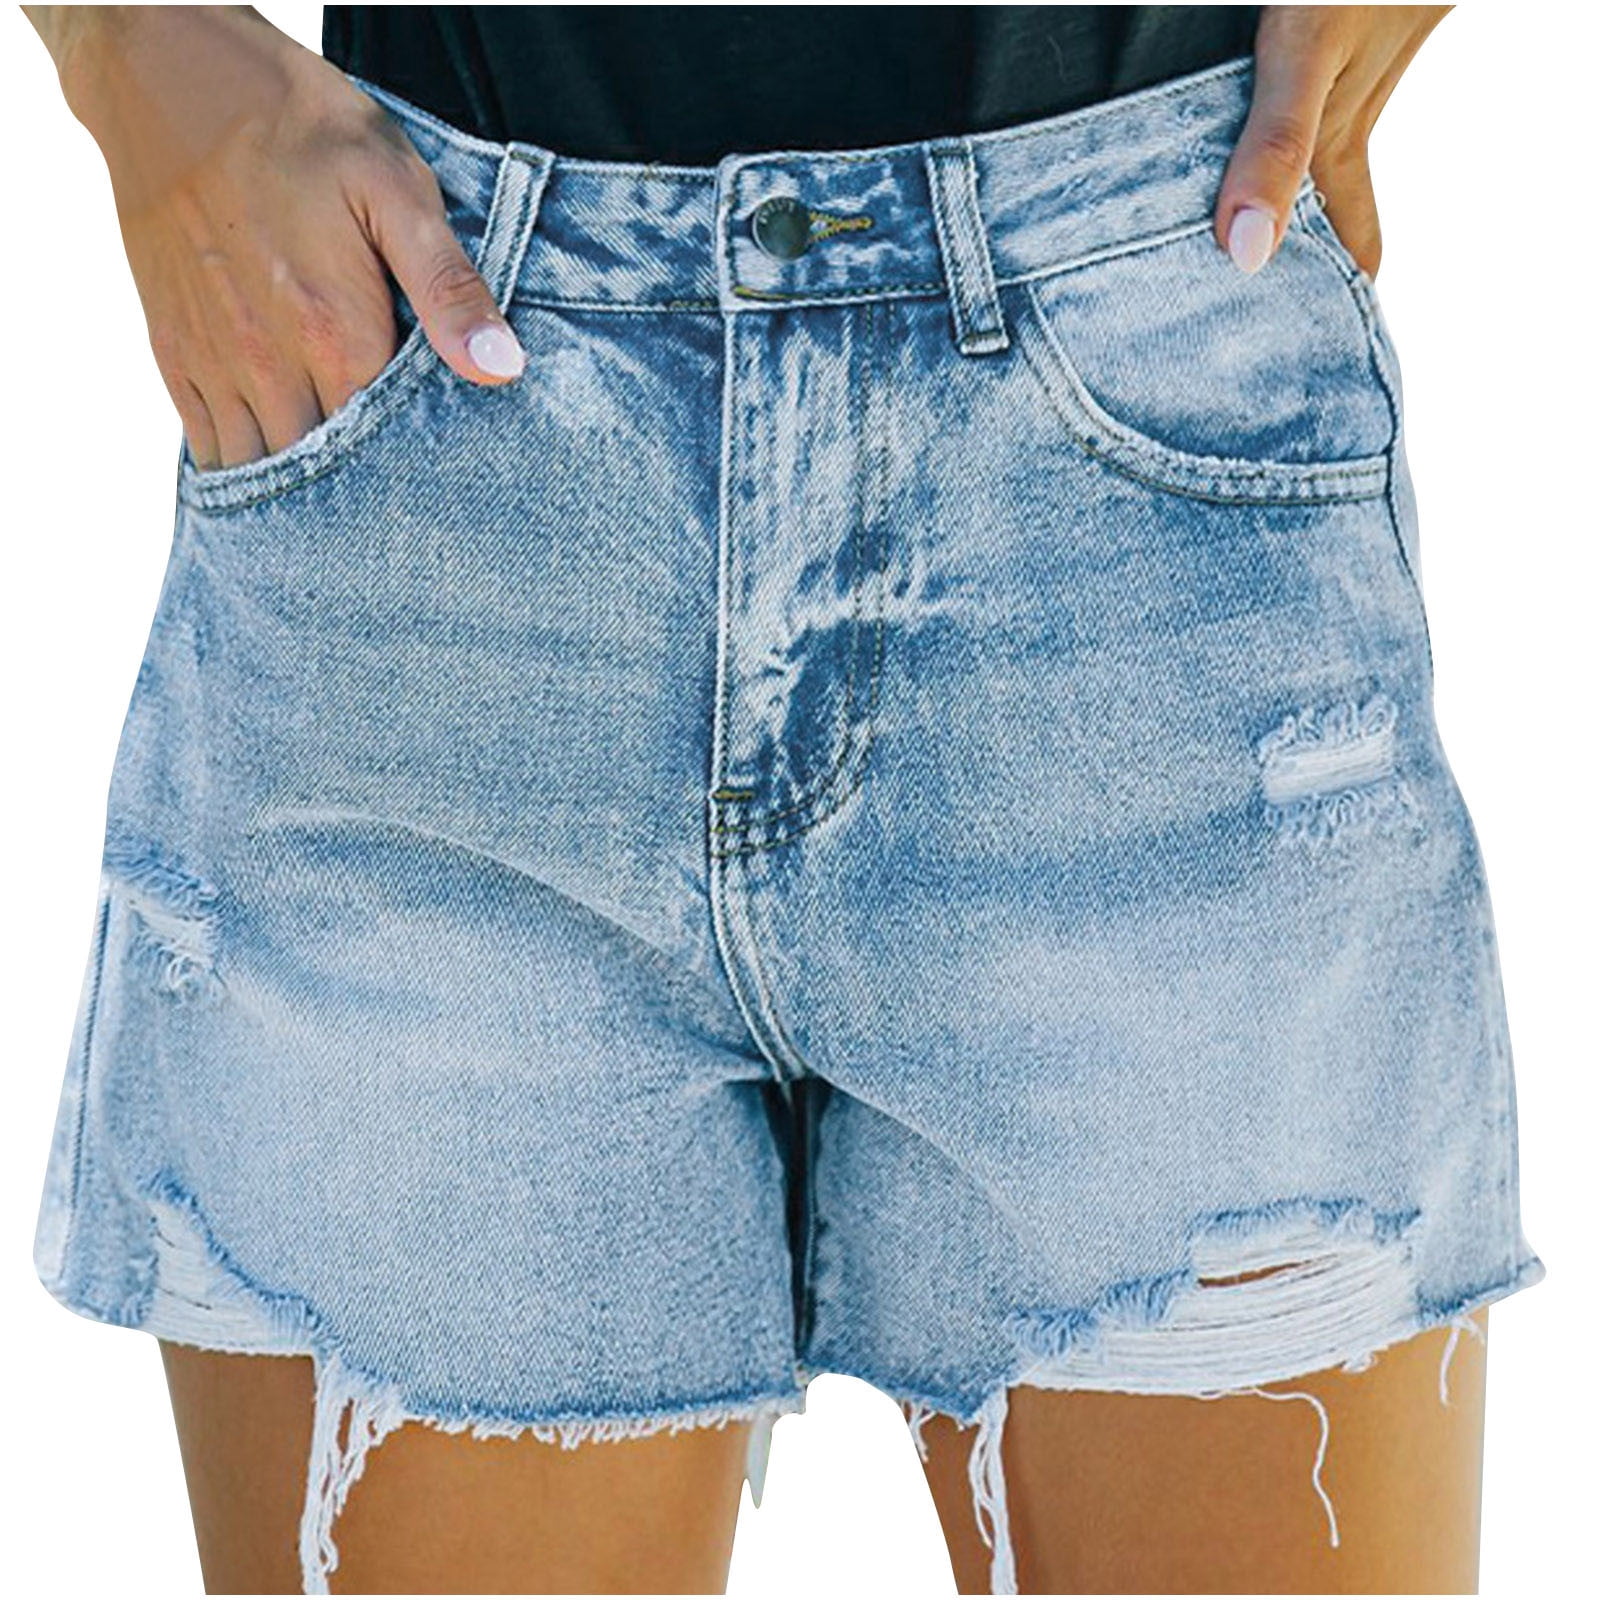 YYDGH Women's Denim Shorts Casual Mid Waist Ripped Jean Shorts Frayed Raw  Hem Distressed Stretchy Short Jeans Light Blue M 